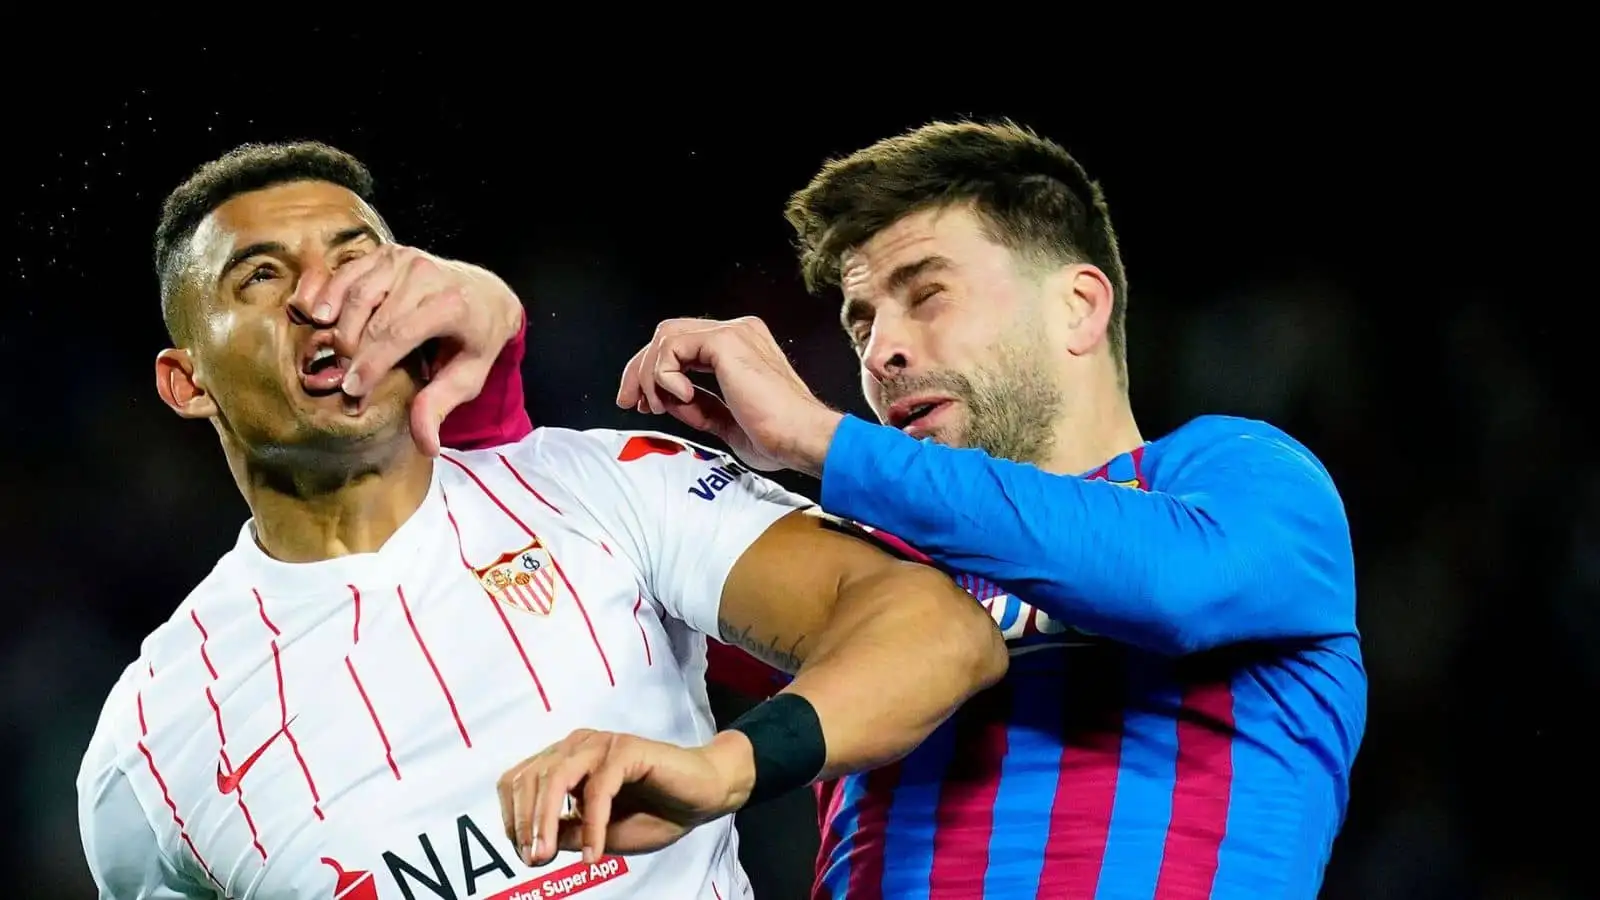 Gerard Pique of FC Barcelona and Diego Carlos of Sevilla FC during the La Liga match between FC Barcelona and Sevilla FC played at Camp Nou Stadium on April 3, 2022 in Barcelona, Spain